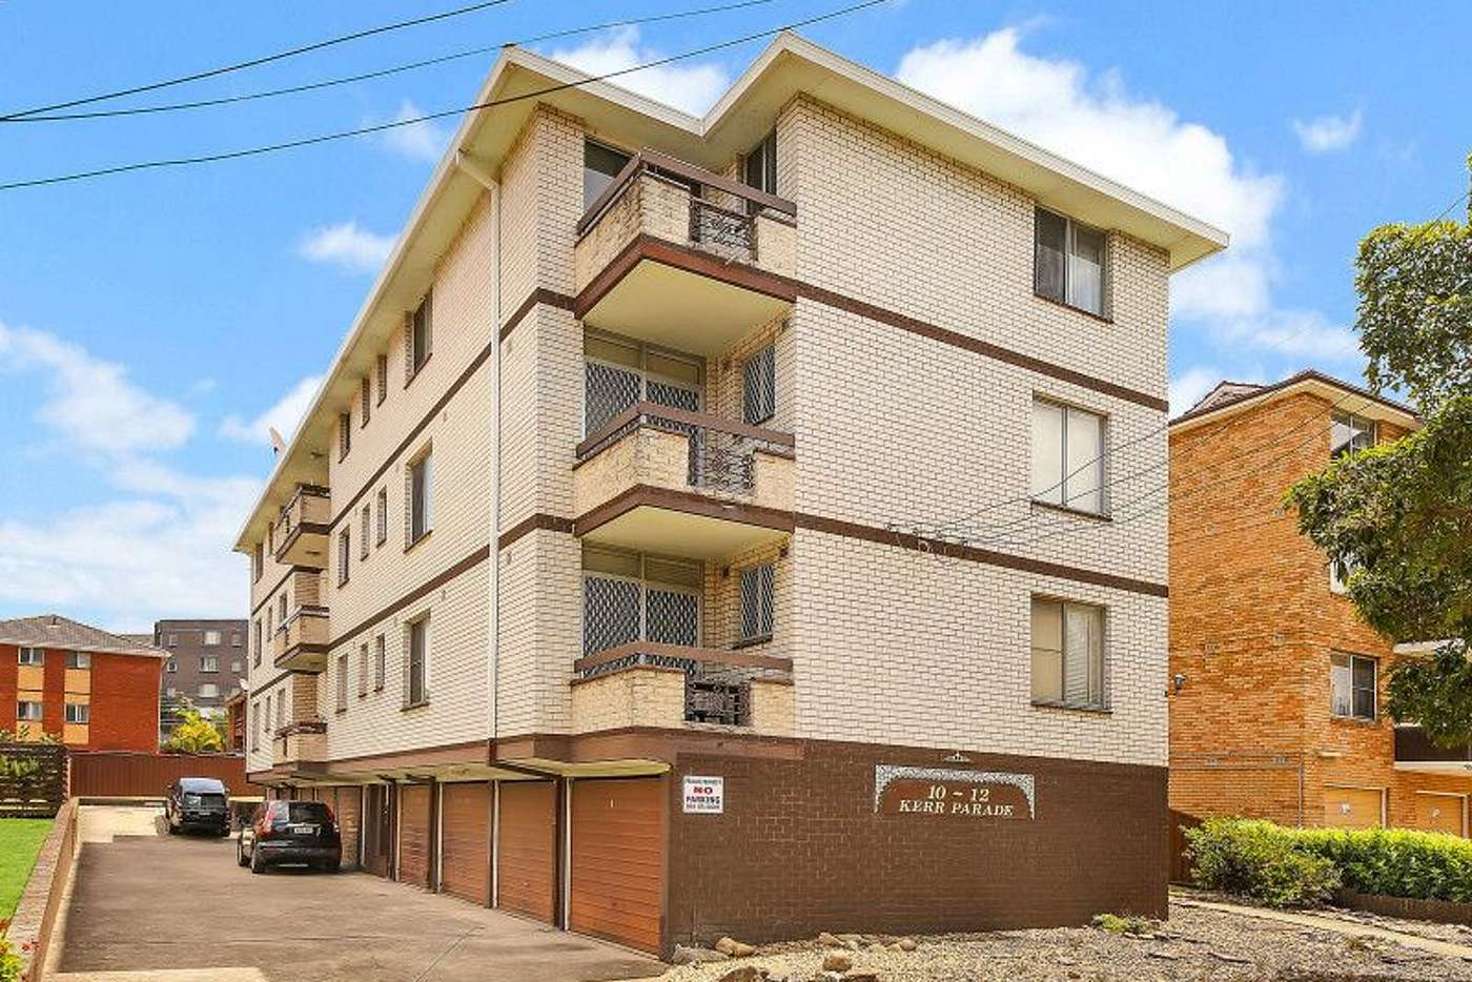 Main view of Homely unit listing, 2/10-12 Kerr Parade, Auburn NSW 2144